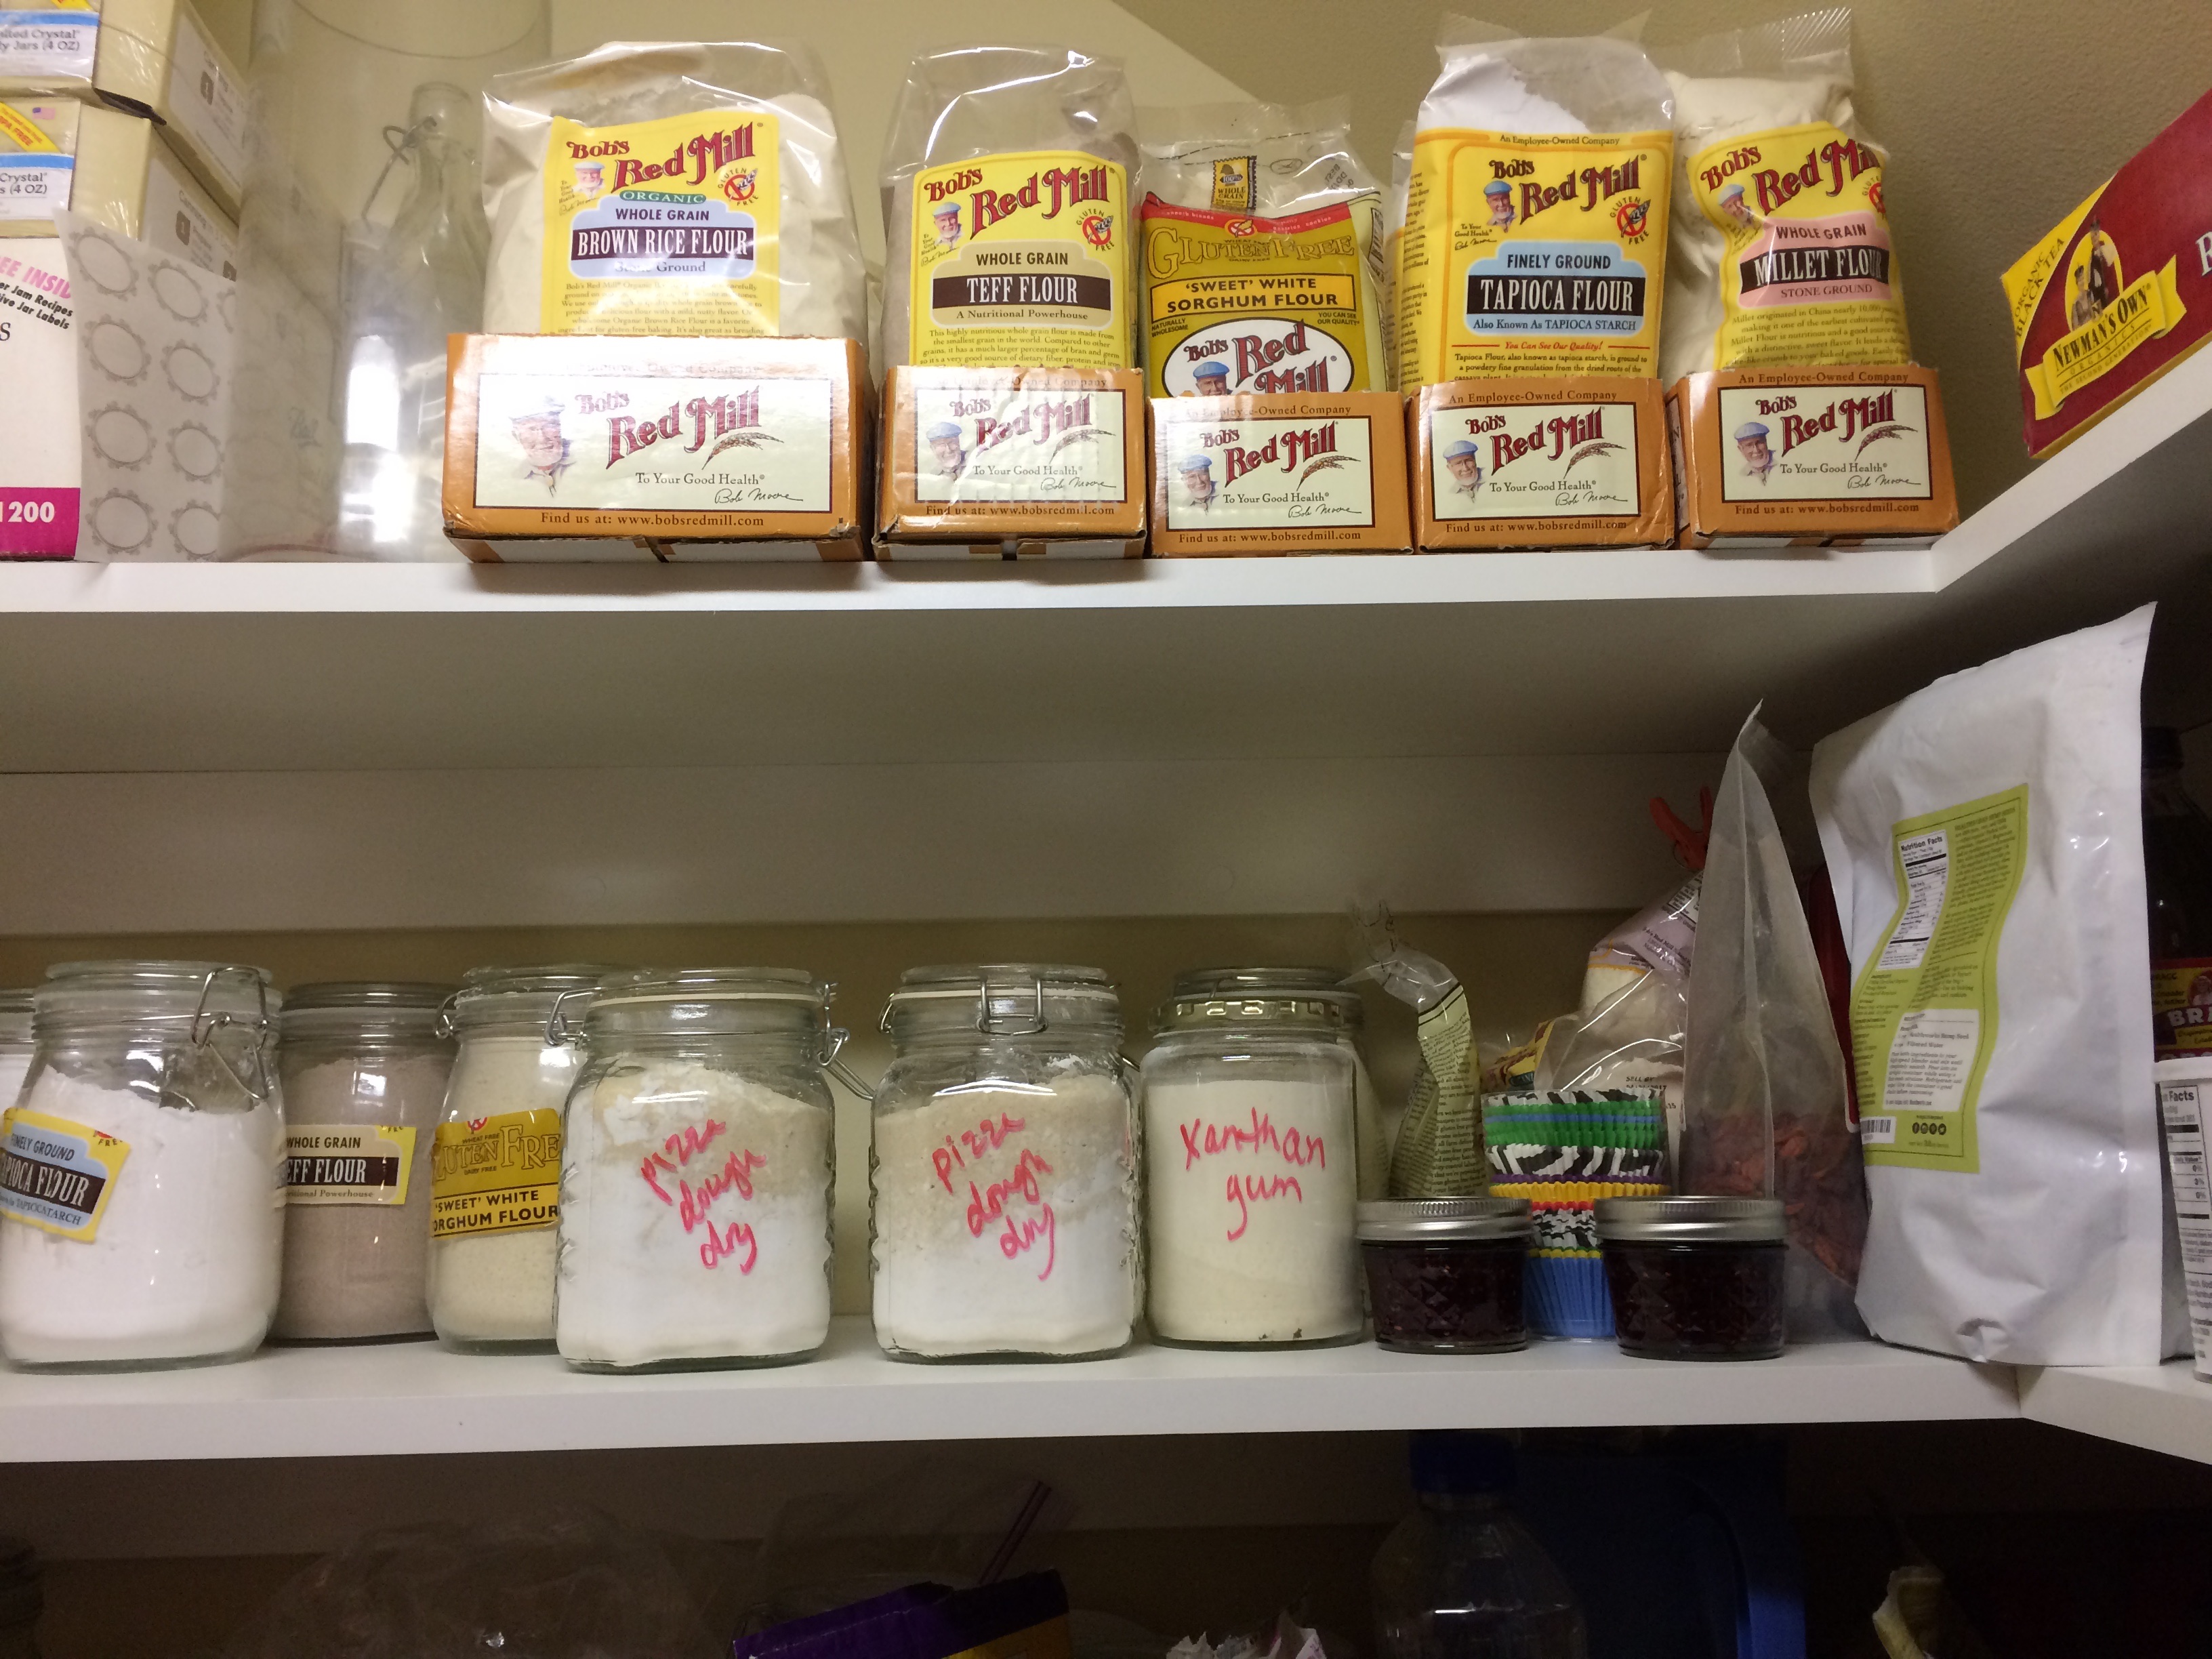 The Top 10 Gluten-free Flours and Starches to Stock Your Pantry | RachaelRoehmholdt.com